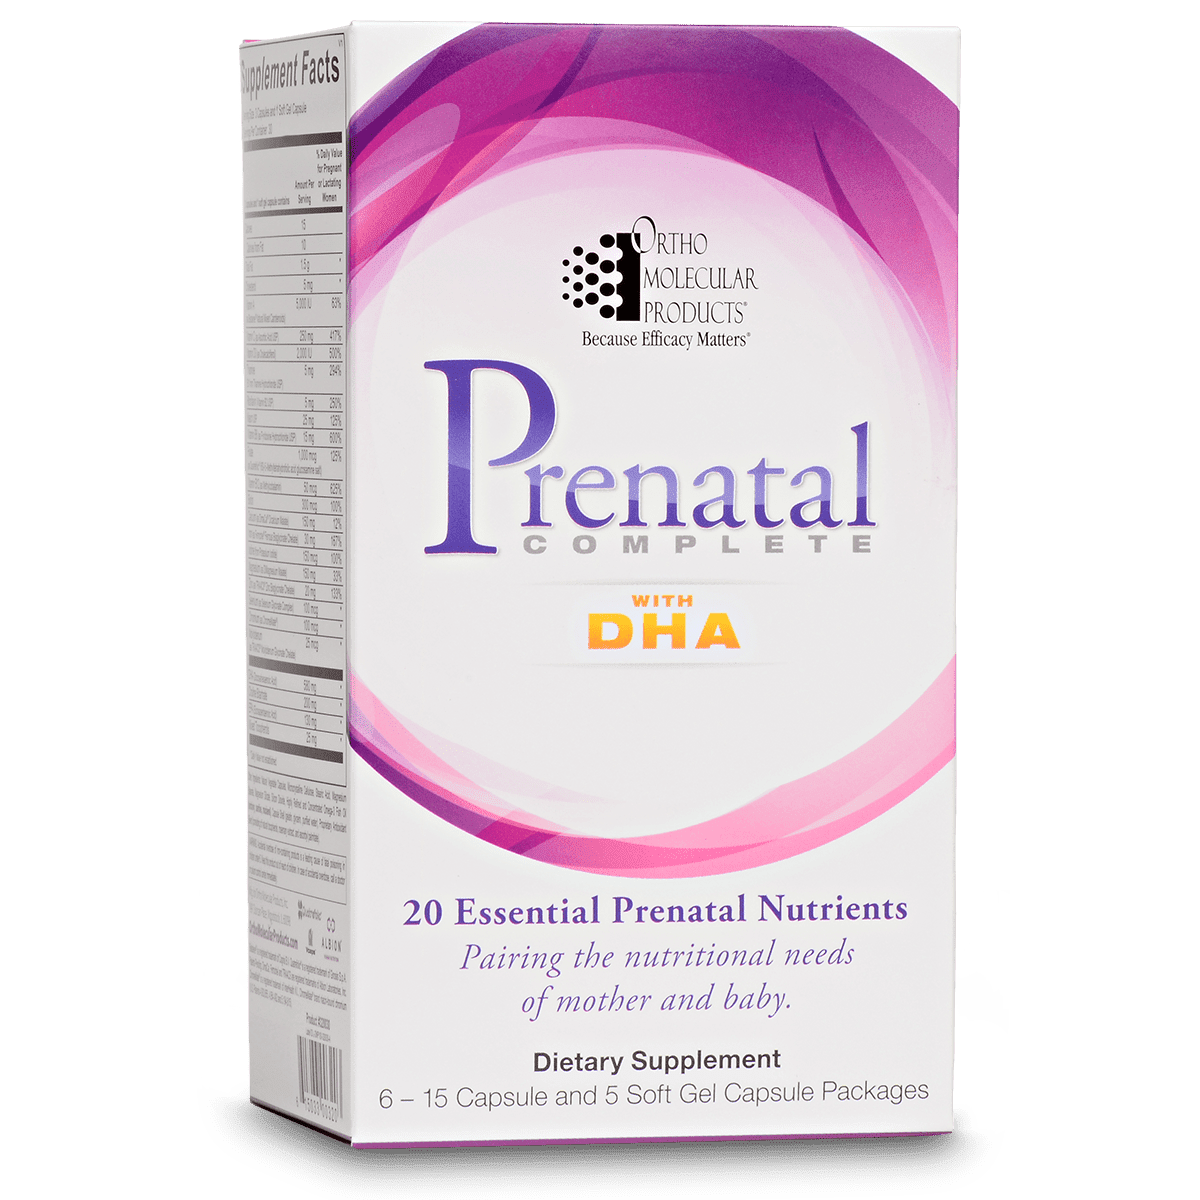 prenatal complete with dha 3201c5e6bf6 8217 4764 8fe0 c75dc8b39728